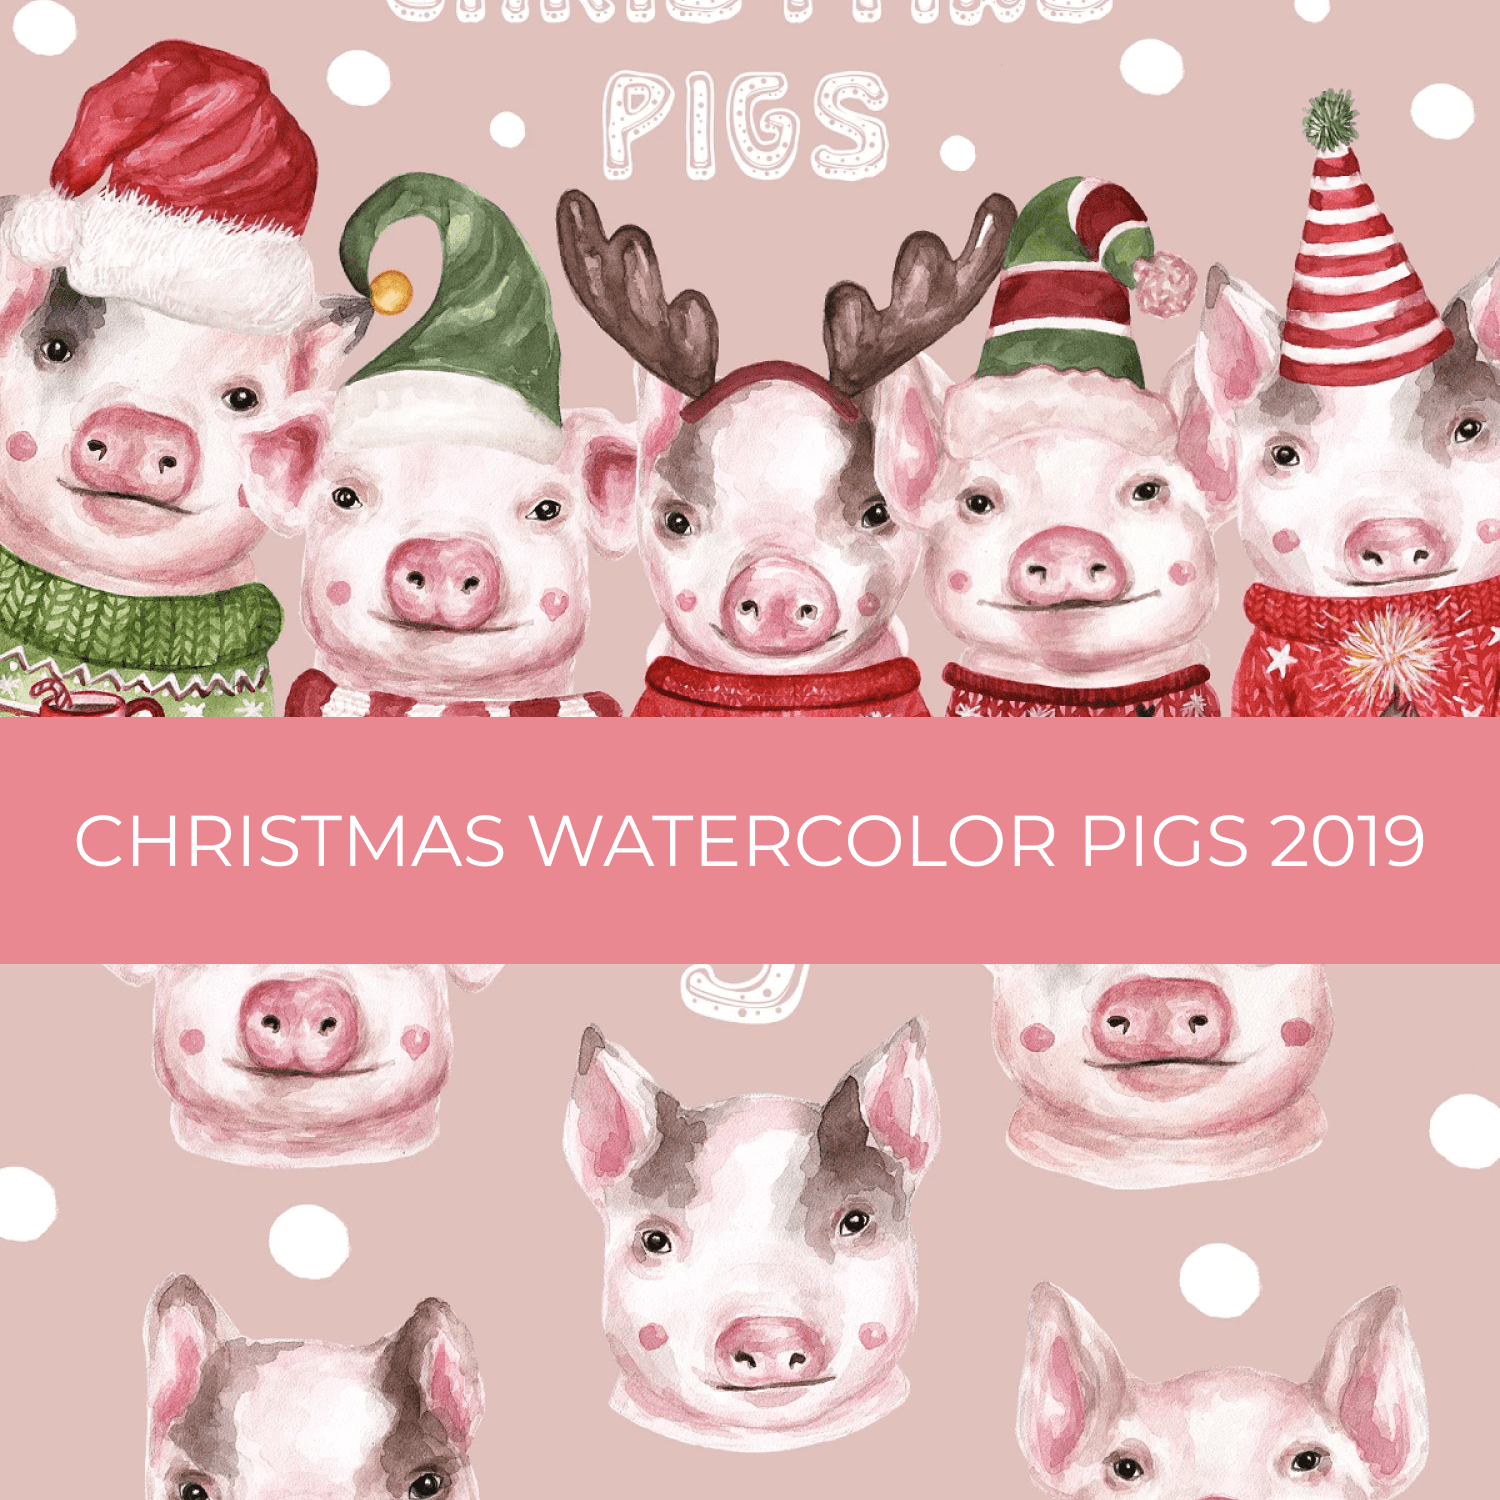 Christmas Watercolor Pigs 2019 cover.